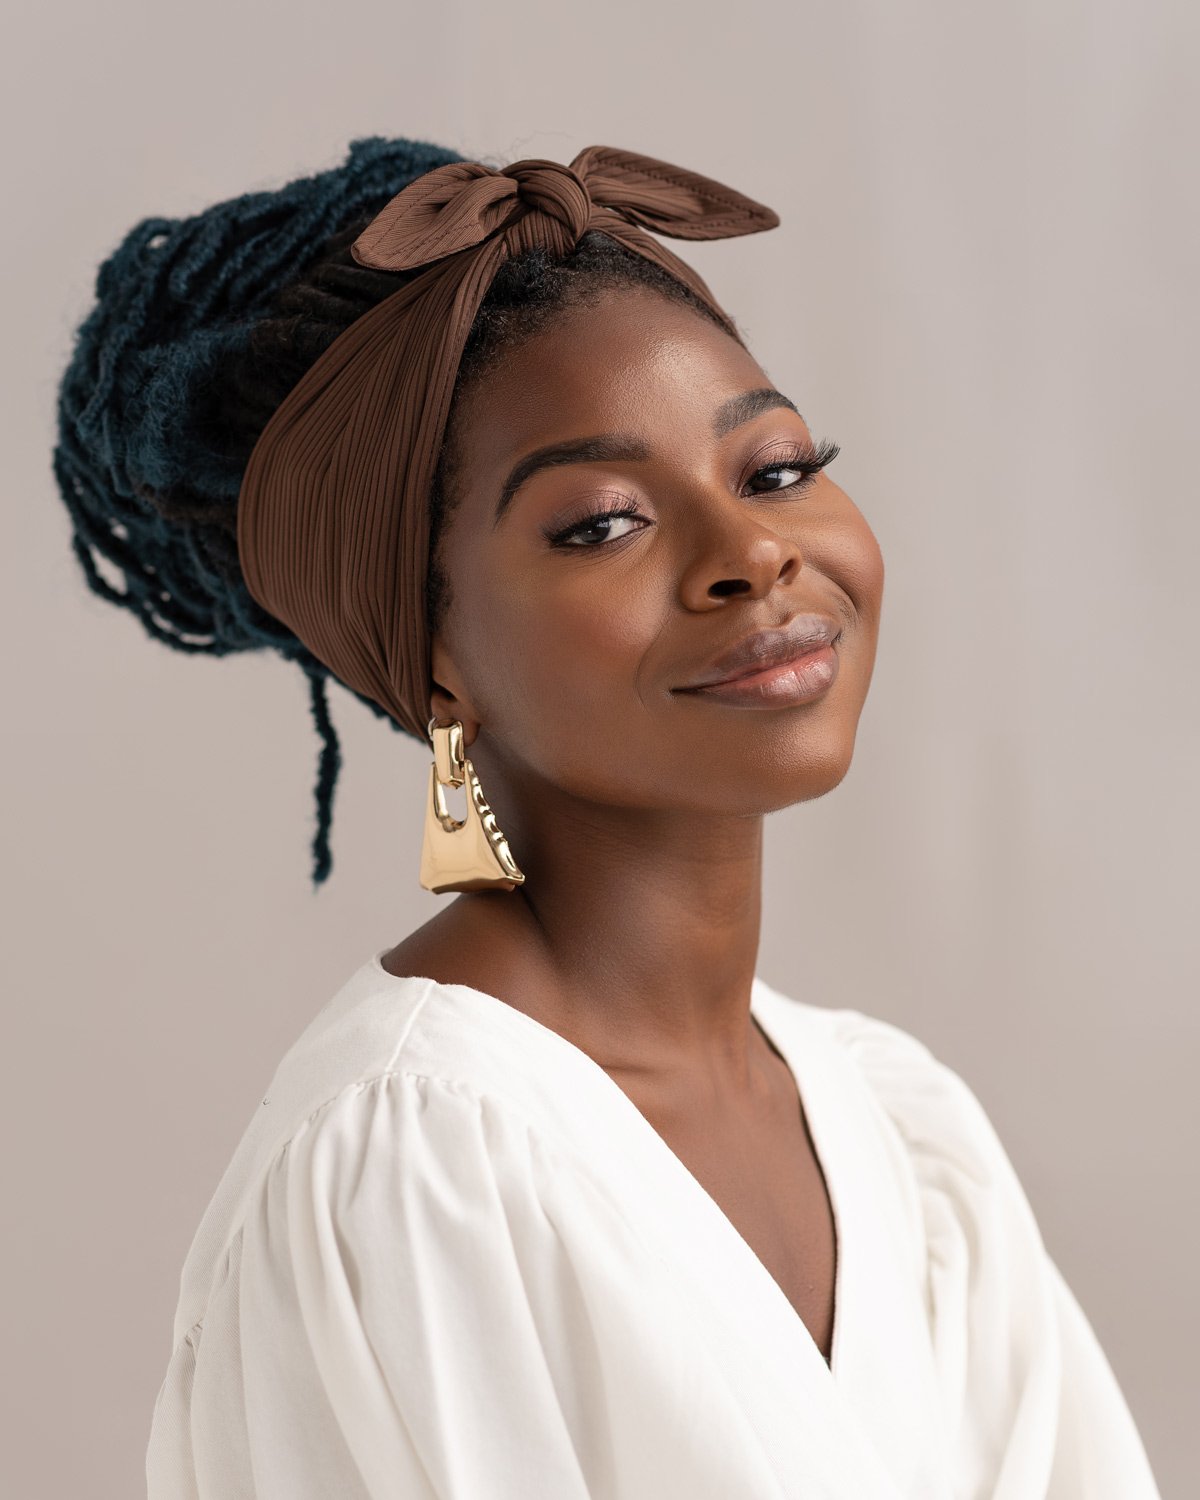 Black woman smiling in a brown head wrap